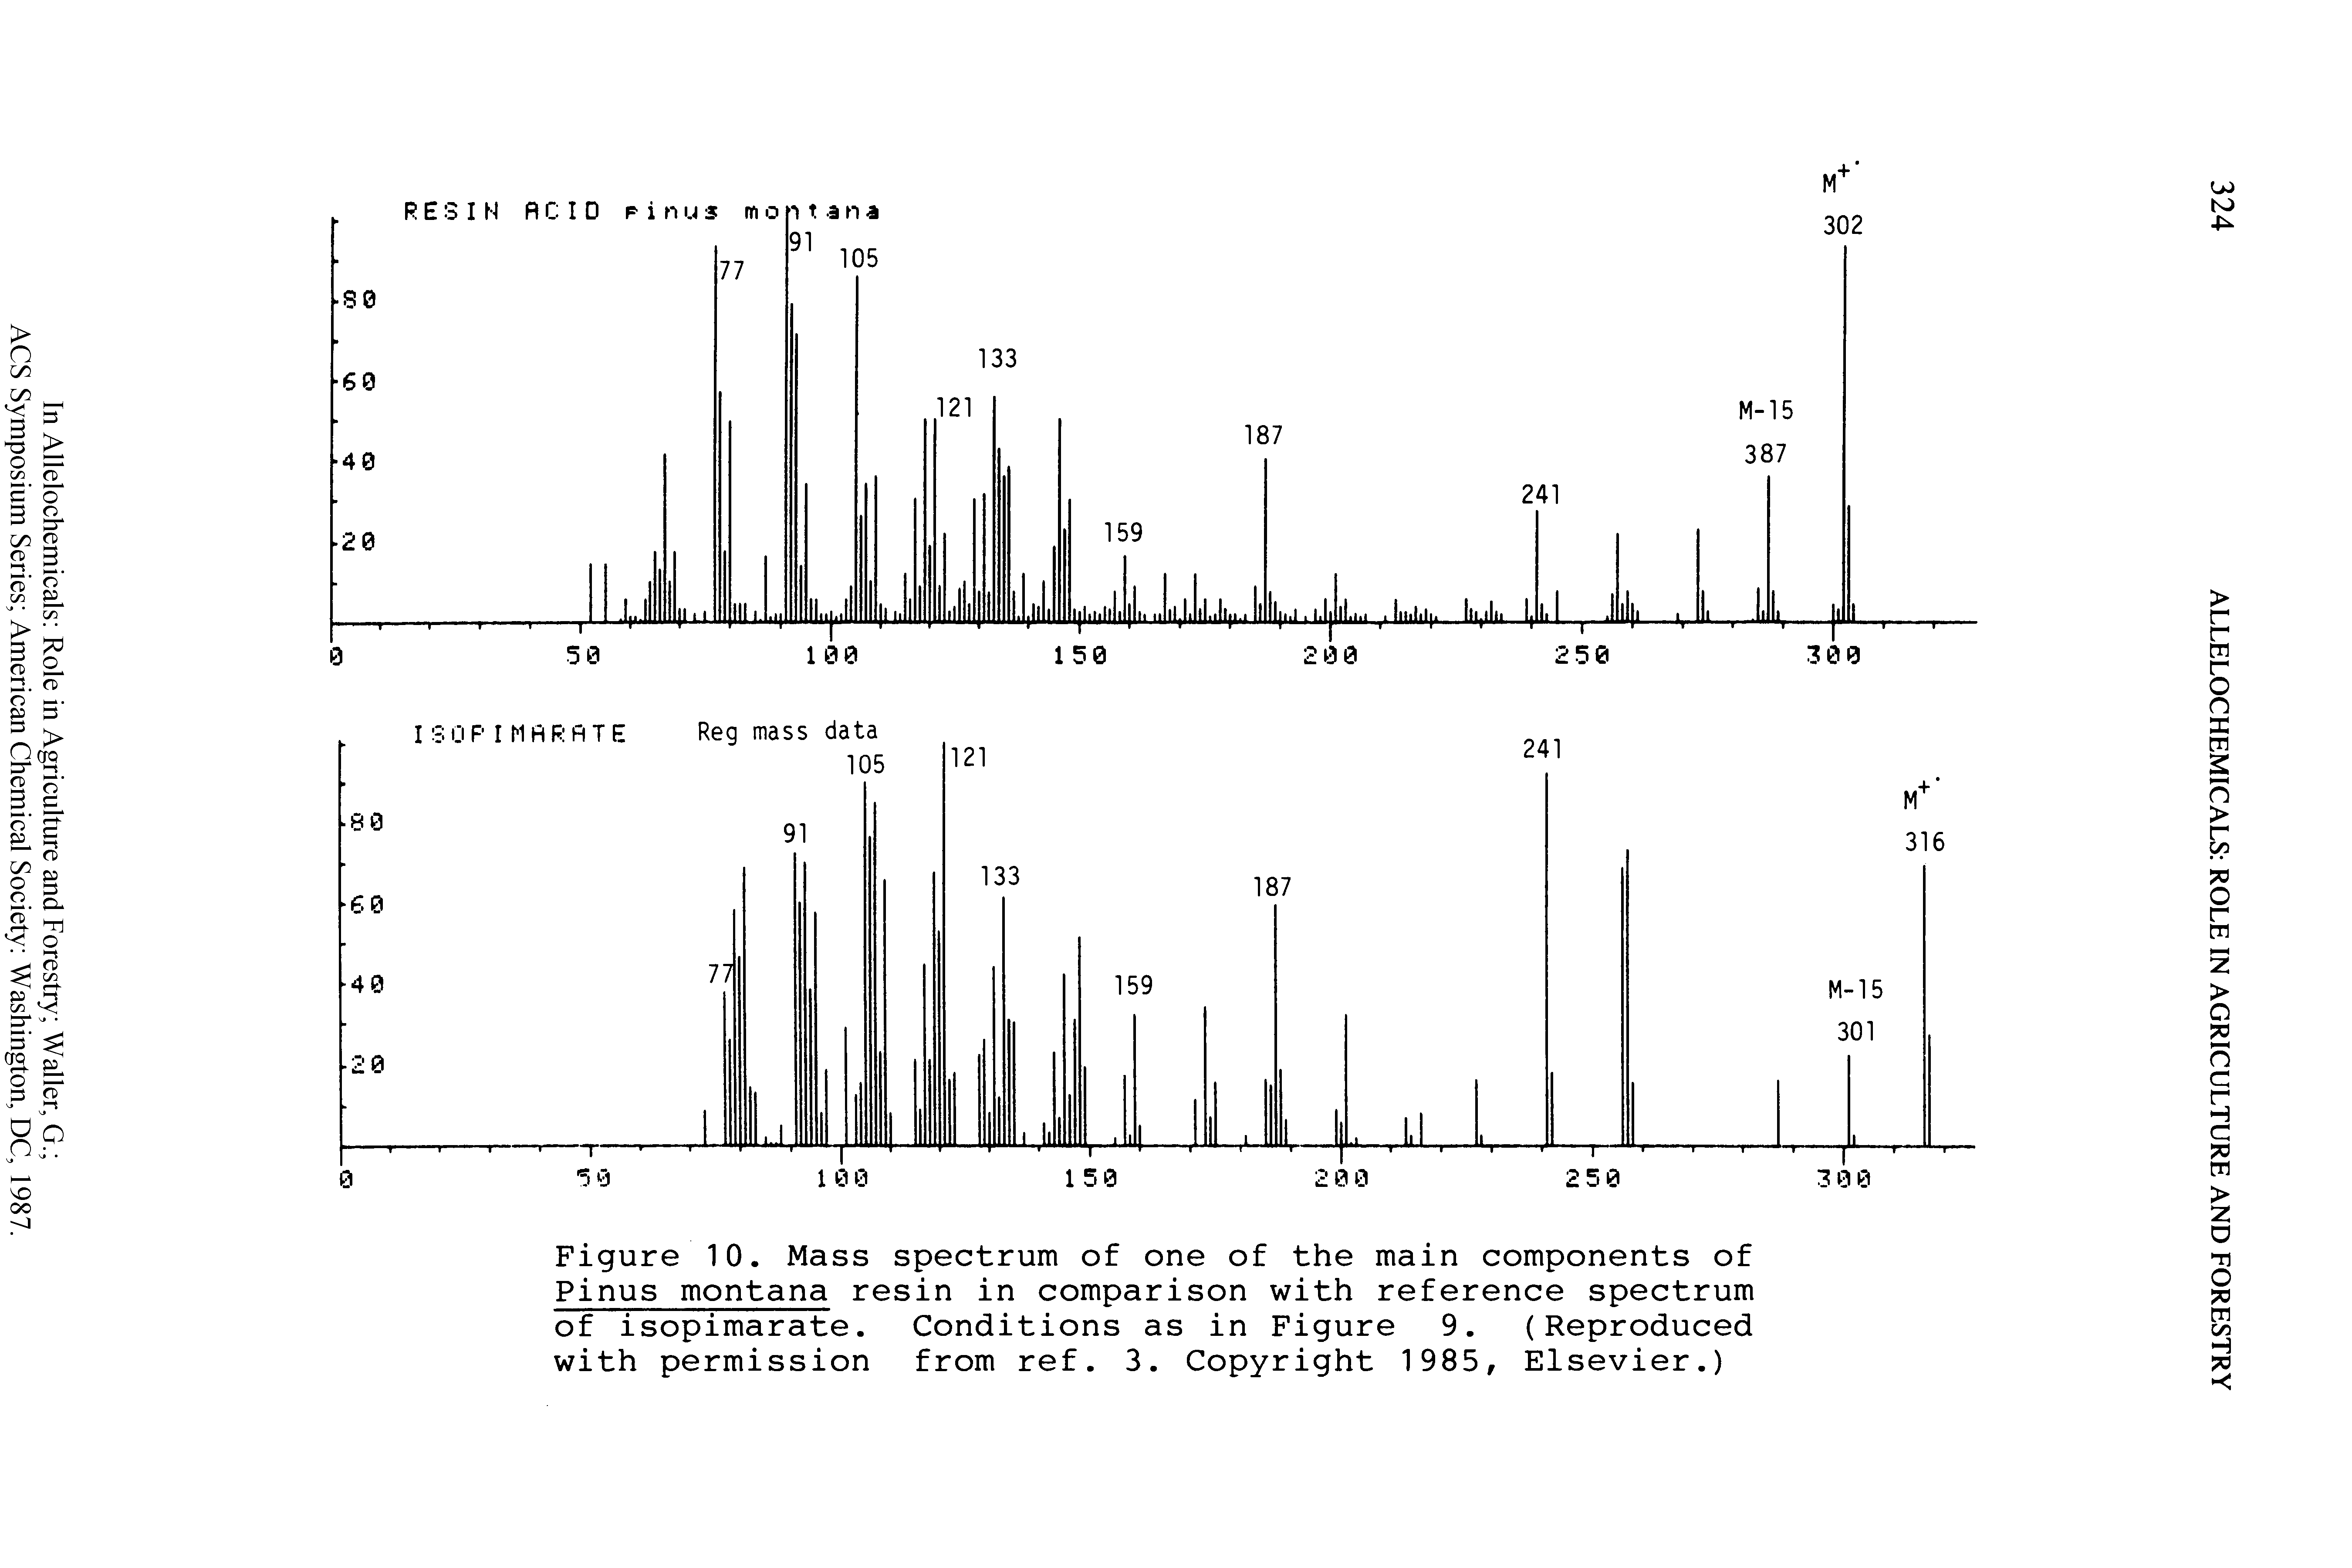 Figure 10. Mass spectrum of one of the main components of Pinus montana resin in comparison with reference spectrum of isopimarate. Conditions as in Figure 9. (Reproduced with permission from ref. 3. Copyright 1985, Elsevier.)...